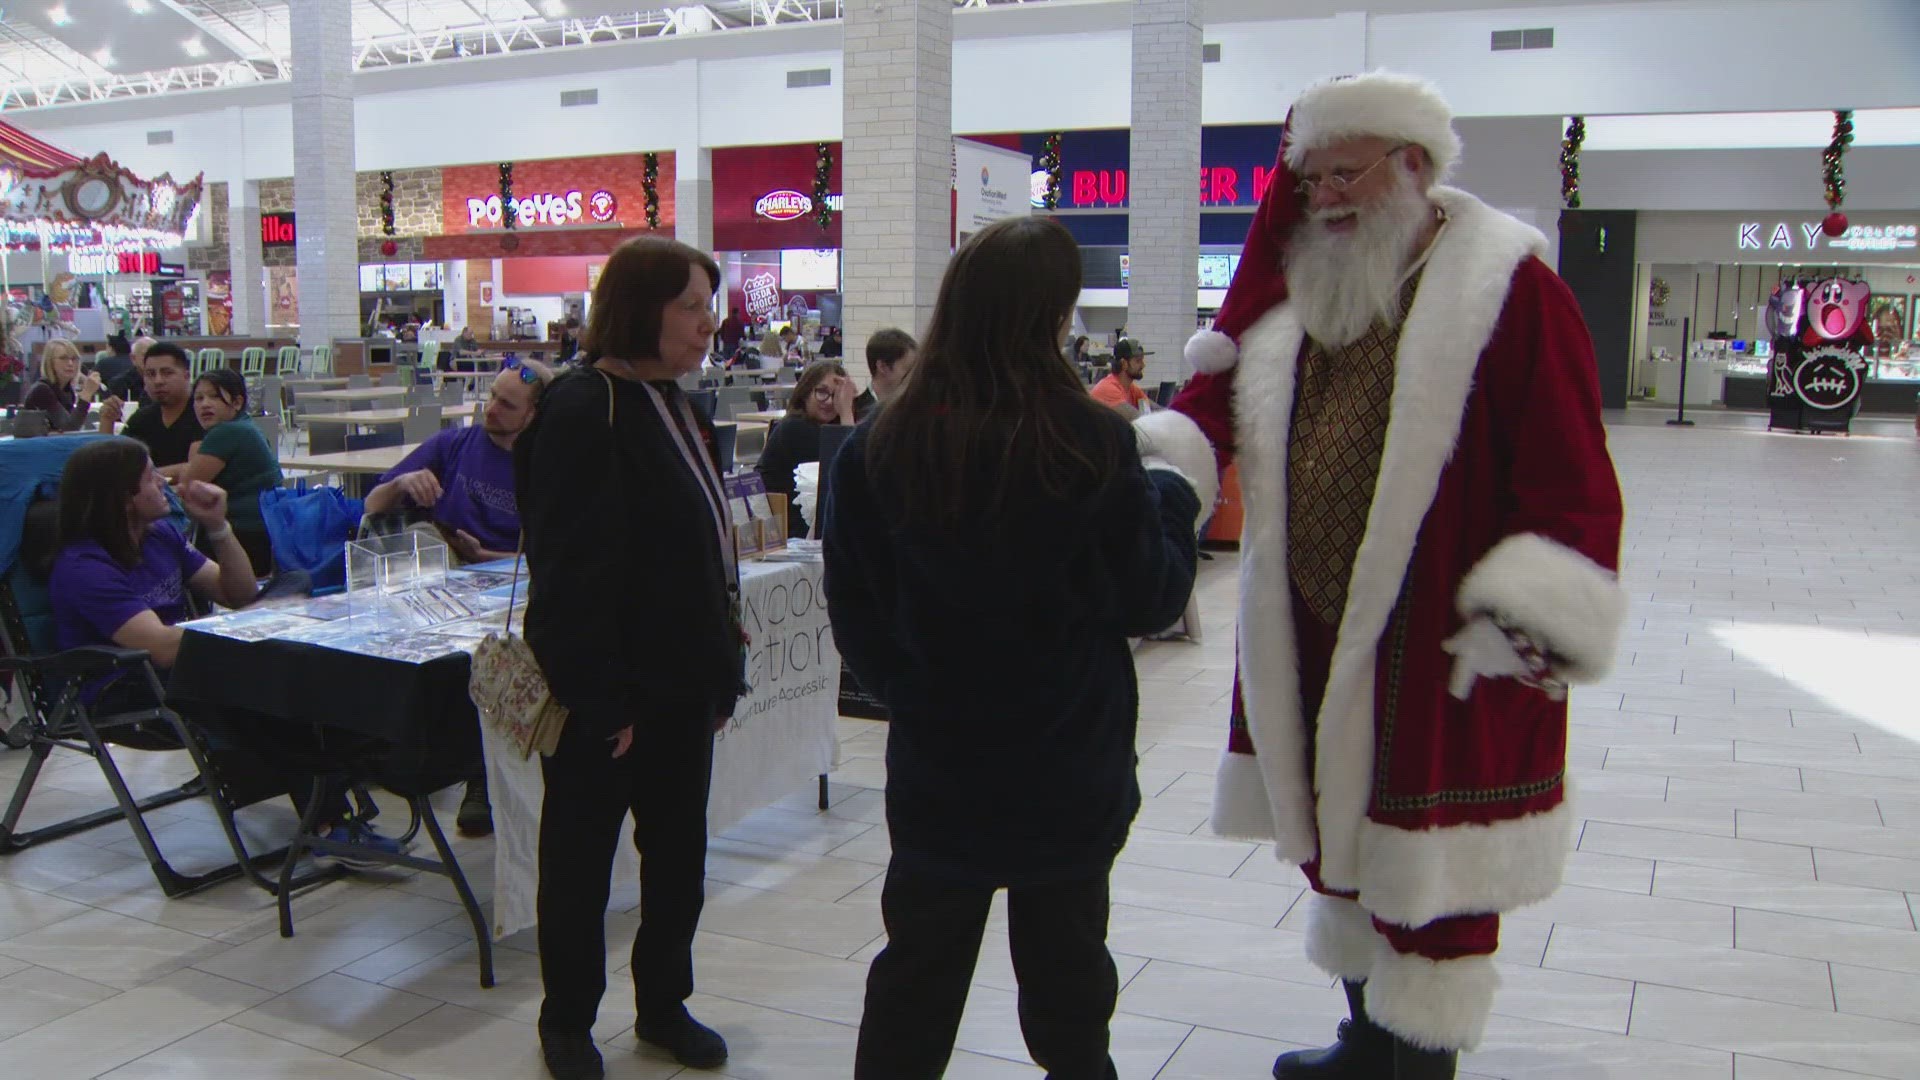 Santa Claus temporarily left his post Tuesday to visit Colorado Mills Mall in Lakewood, where nonprofits were set up to bring awareness to Colorado Gives Day.